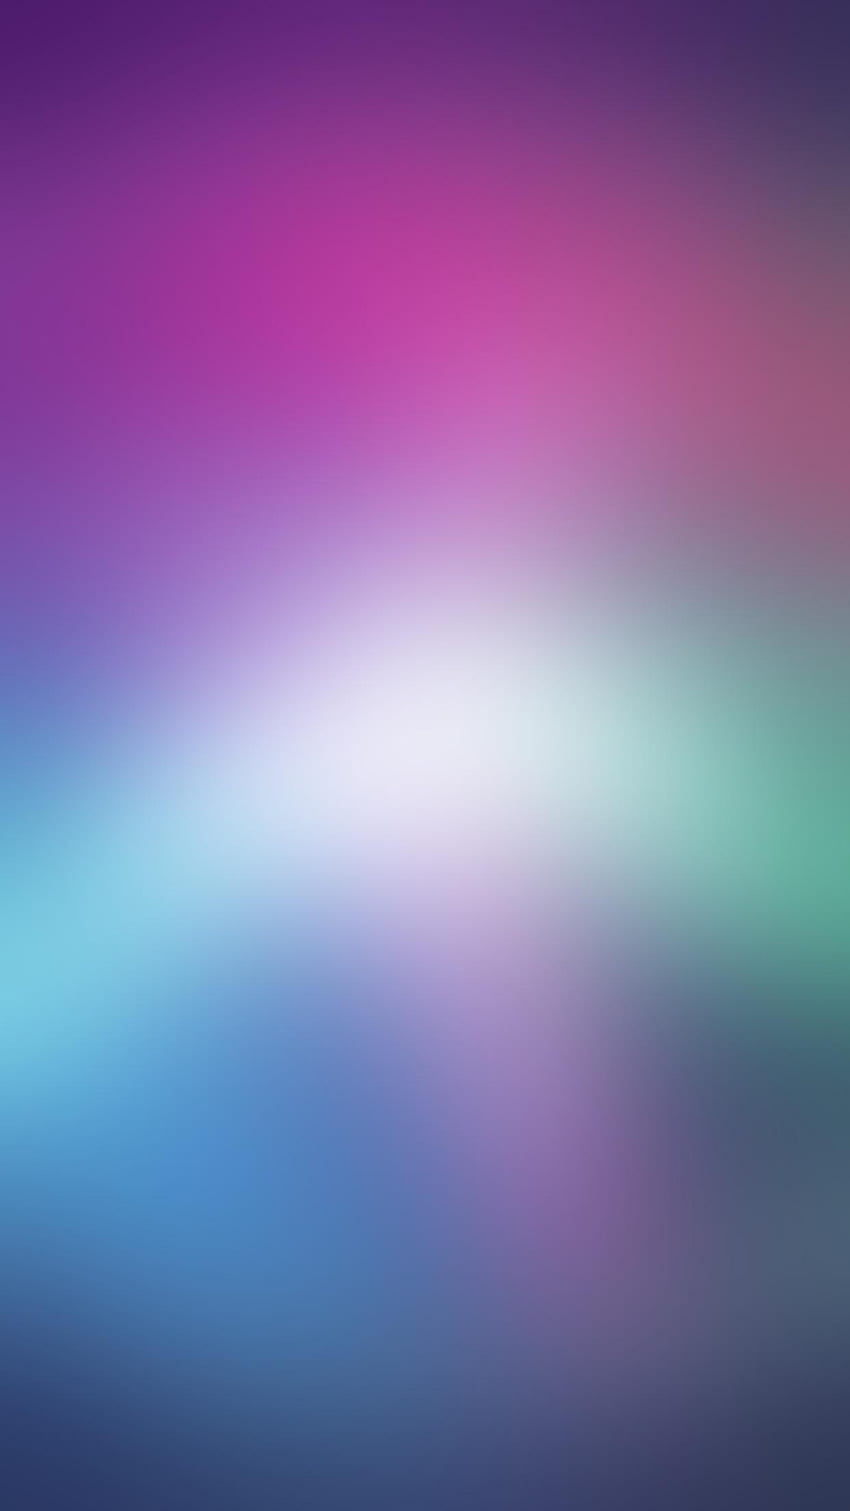 Here's a Siri gradient I made from iOS 11 HD phone wallpaper